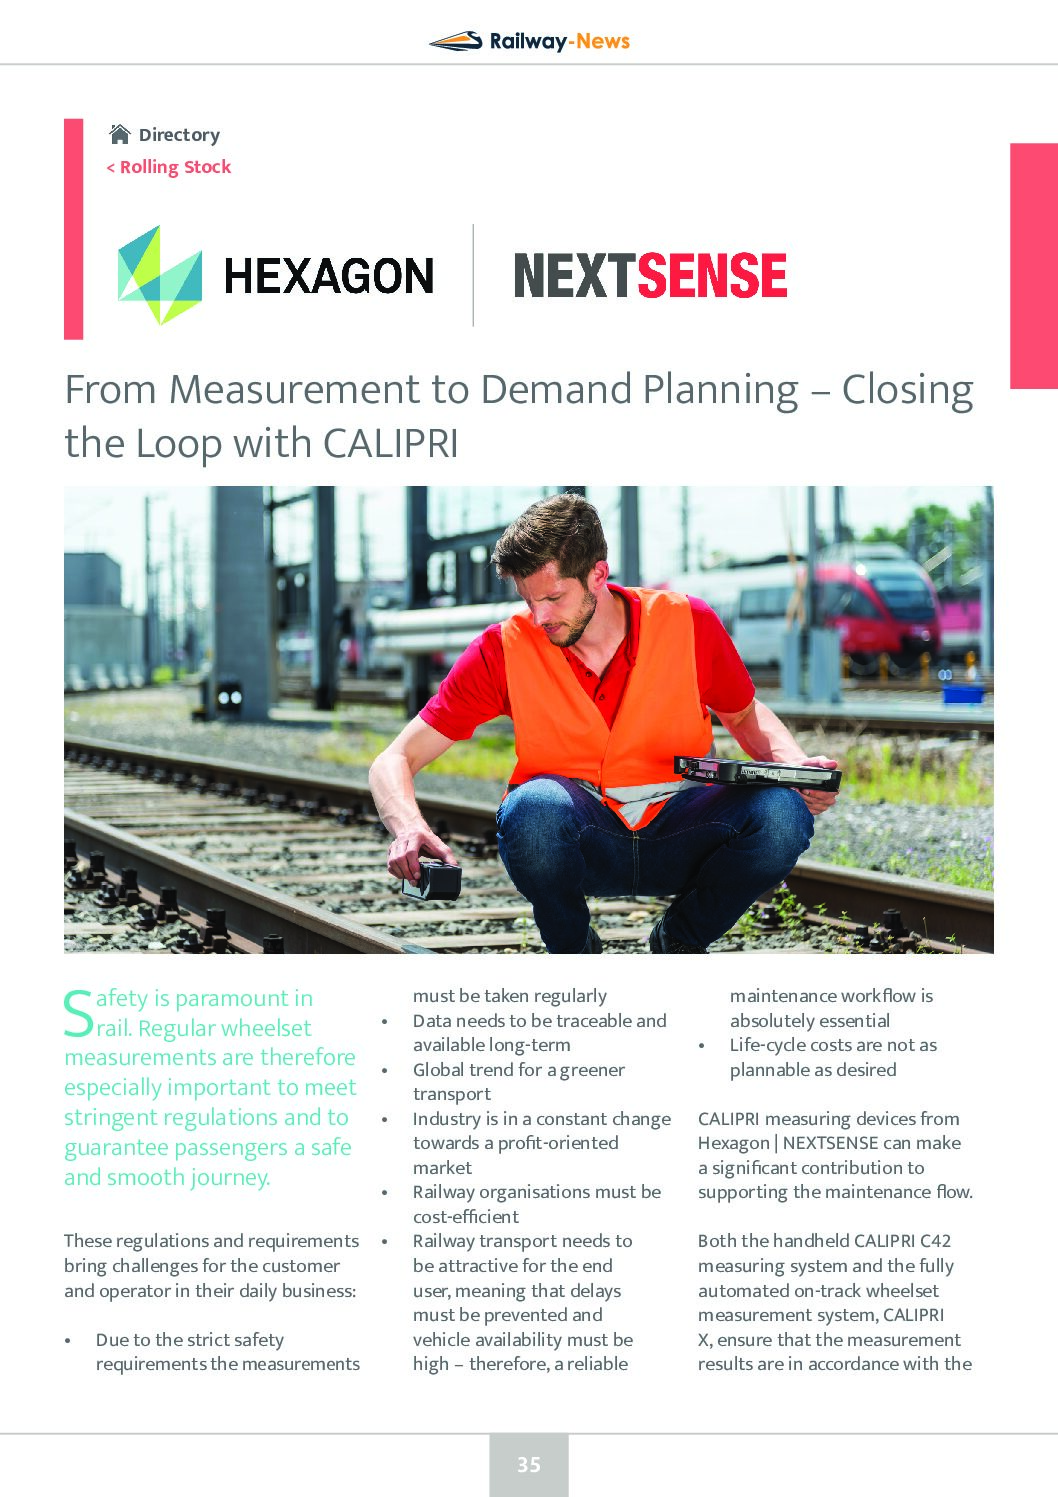 From Measurement to Demand Planning – Closing the Loop with CALIPRI